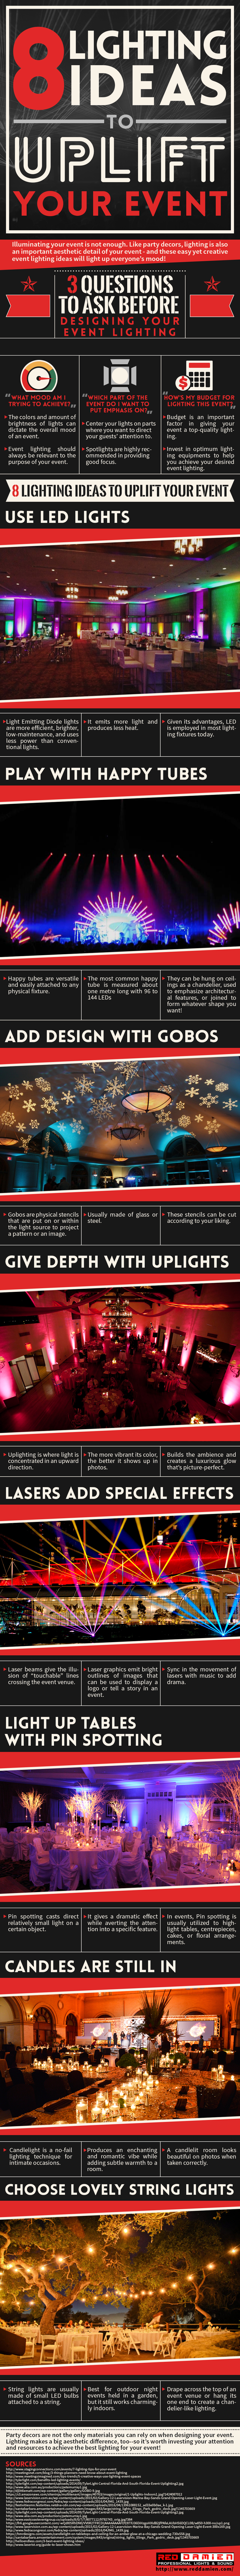 8 Best lighting Ideas For Your Event